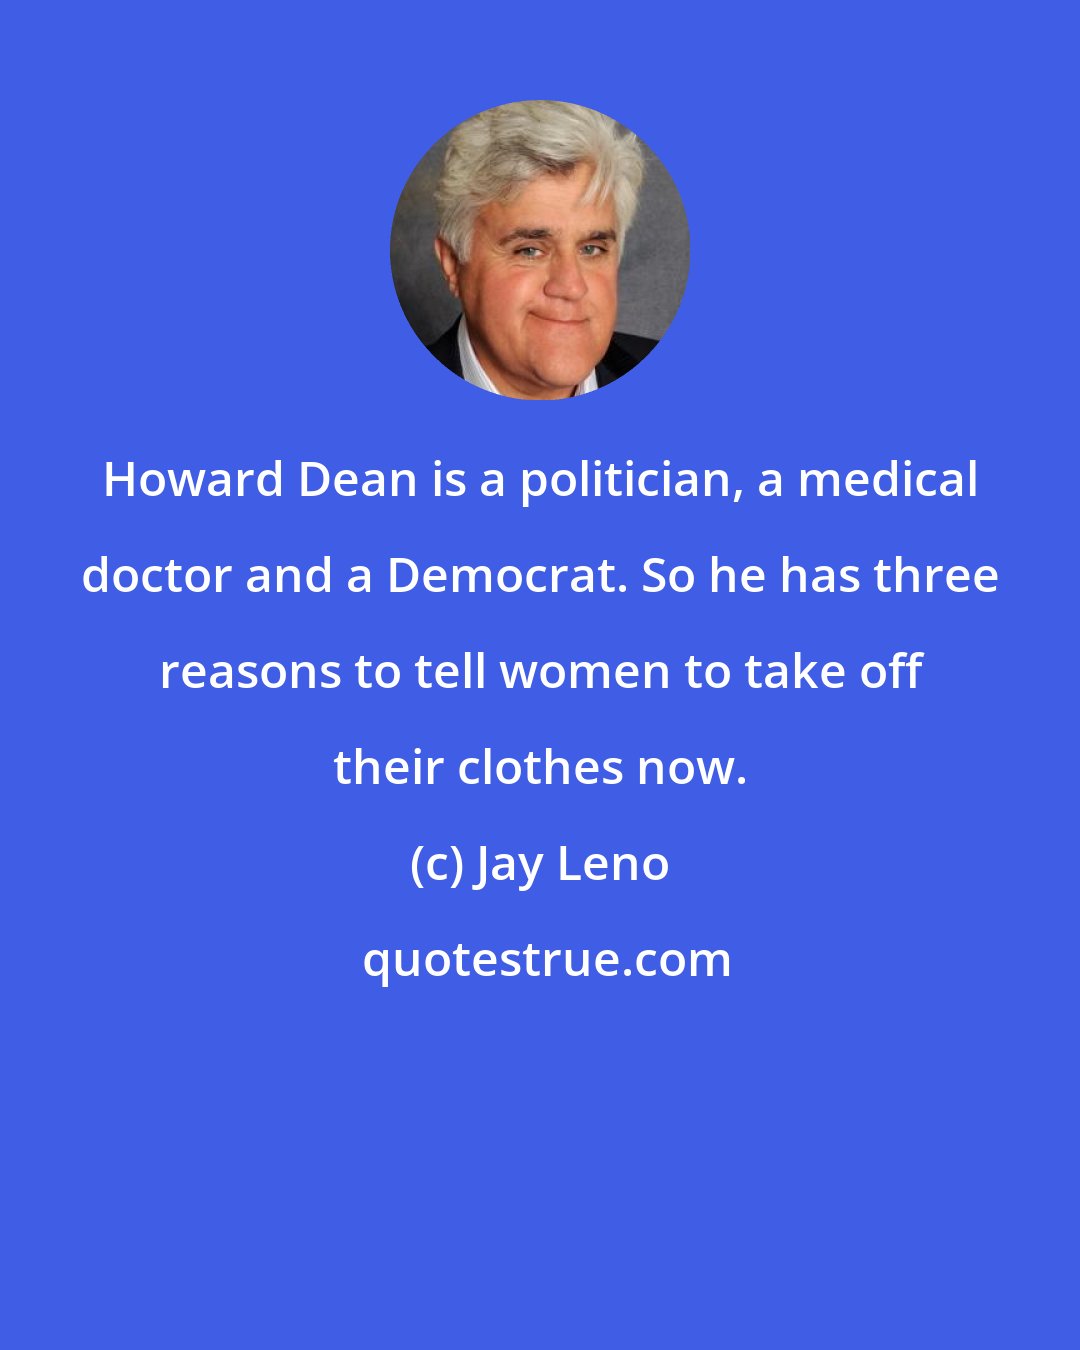 Jay Leno: Howard Dean is a politician, a medical doctor and a Democrat. So he has three reasons to tell women to take off their clothes now.